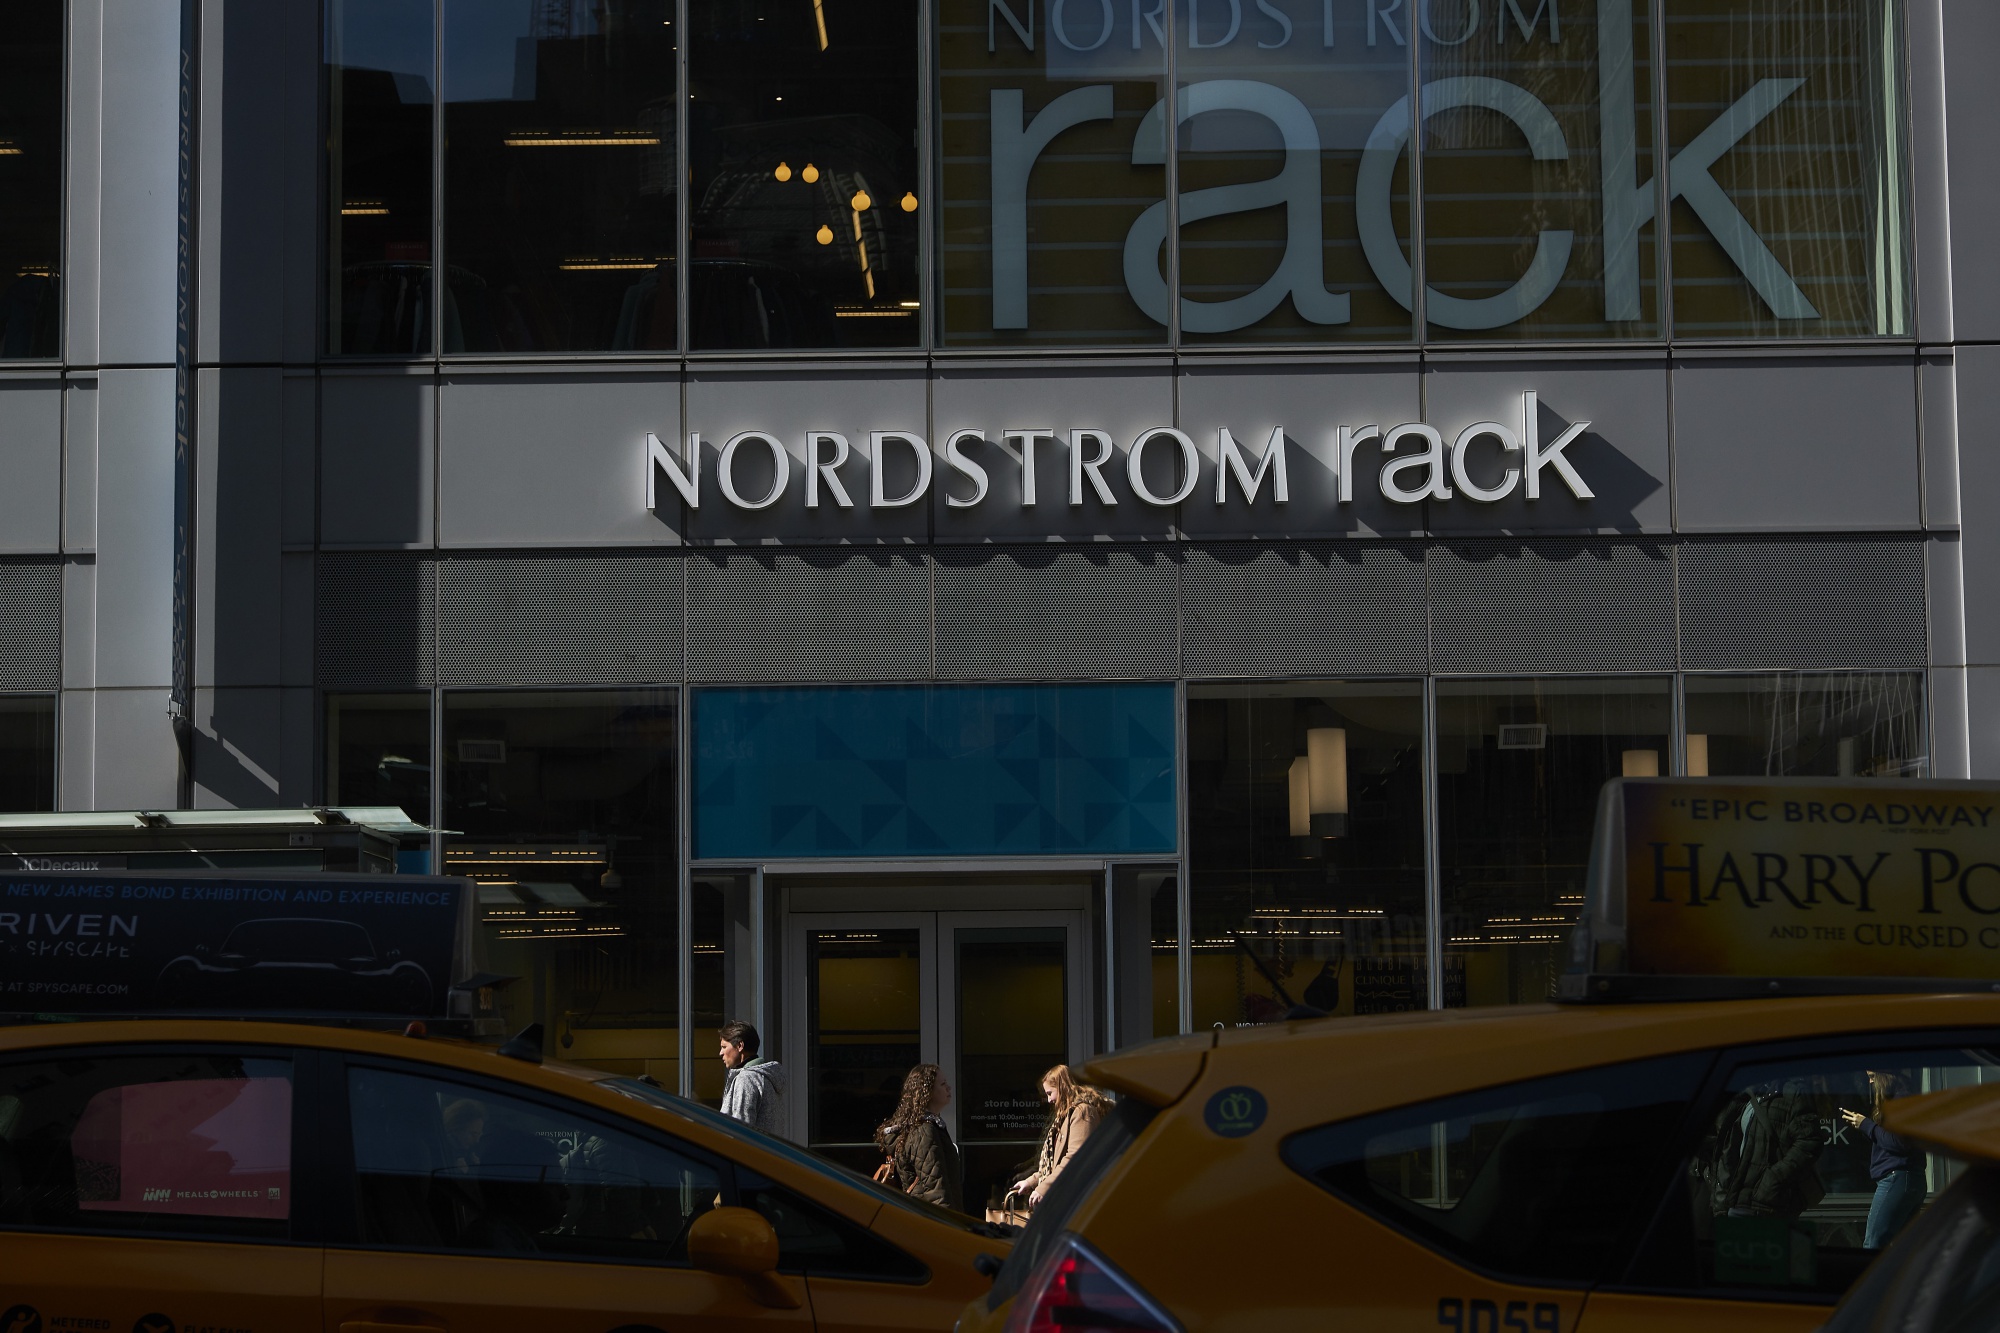 Nordstrom Upgrades Store, Online Technology as Part of $69 Million  Investment, Retail News